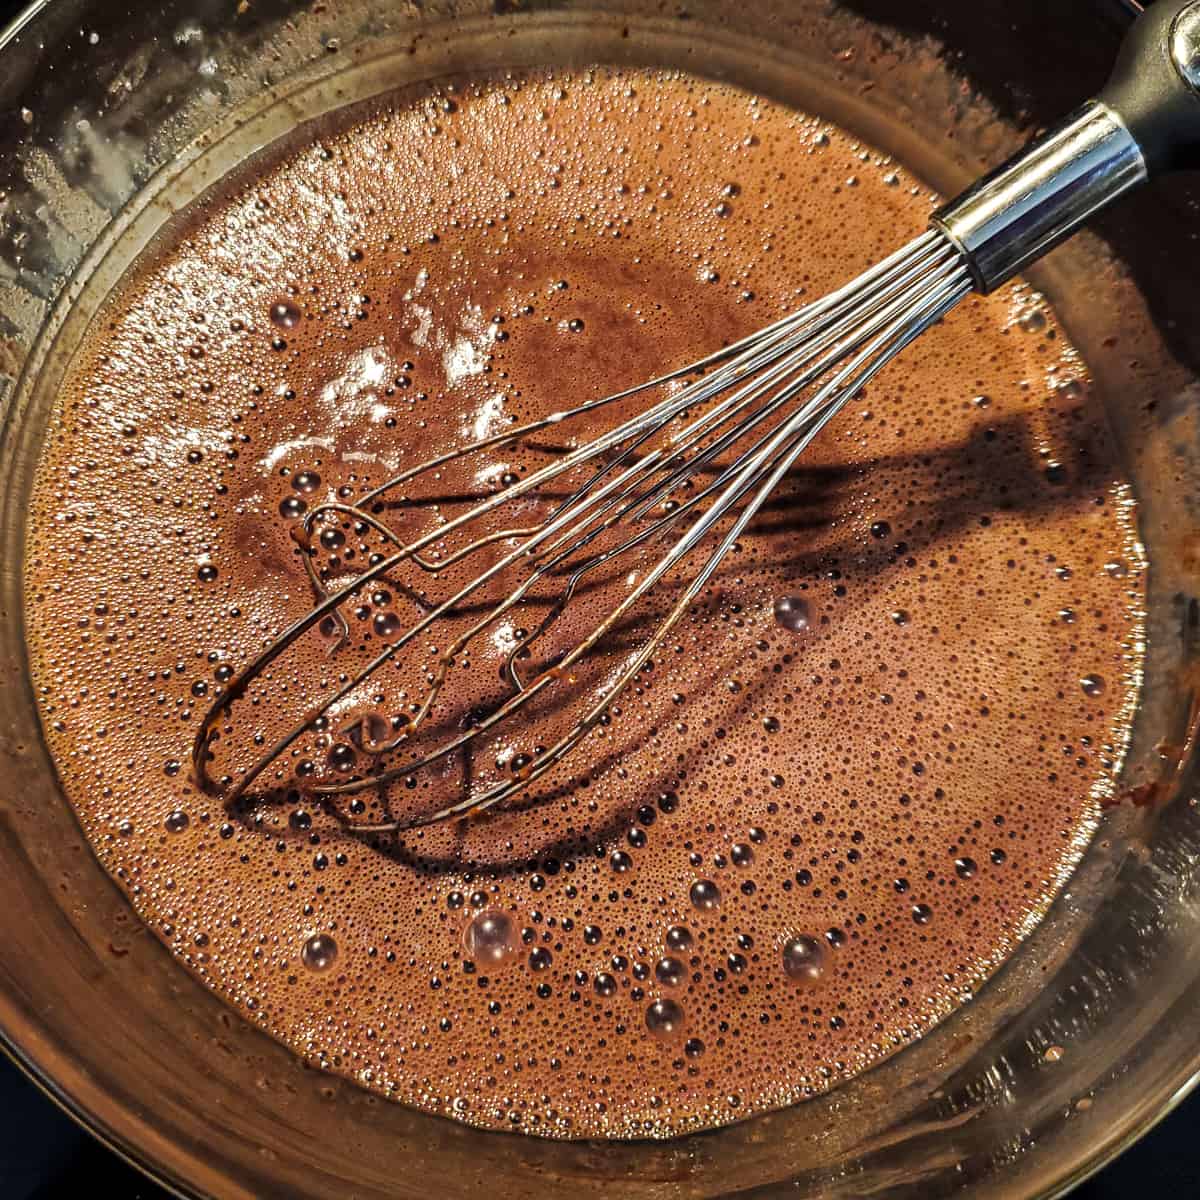 Chocolate custard mixing chocolate amd other ingredients